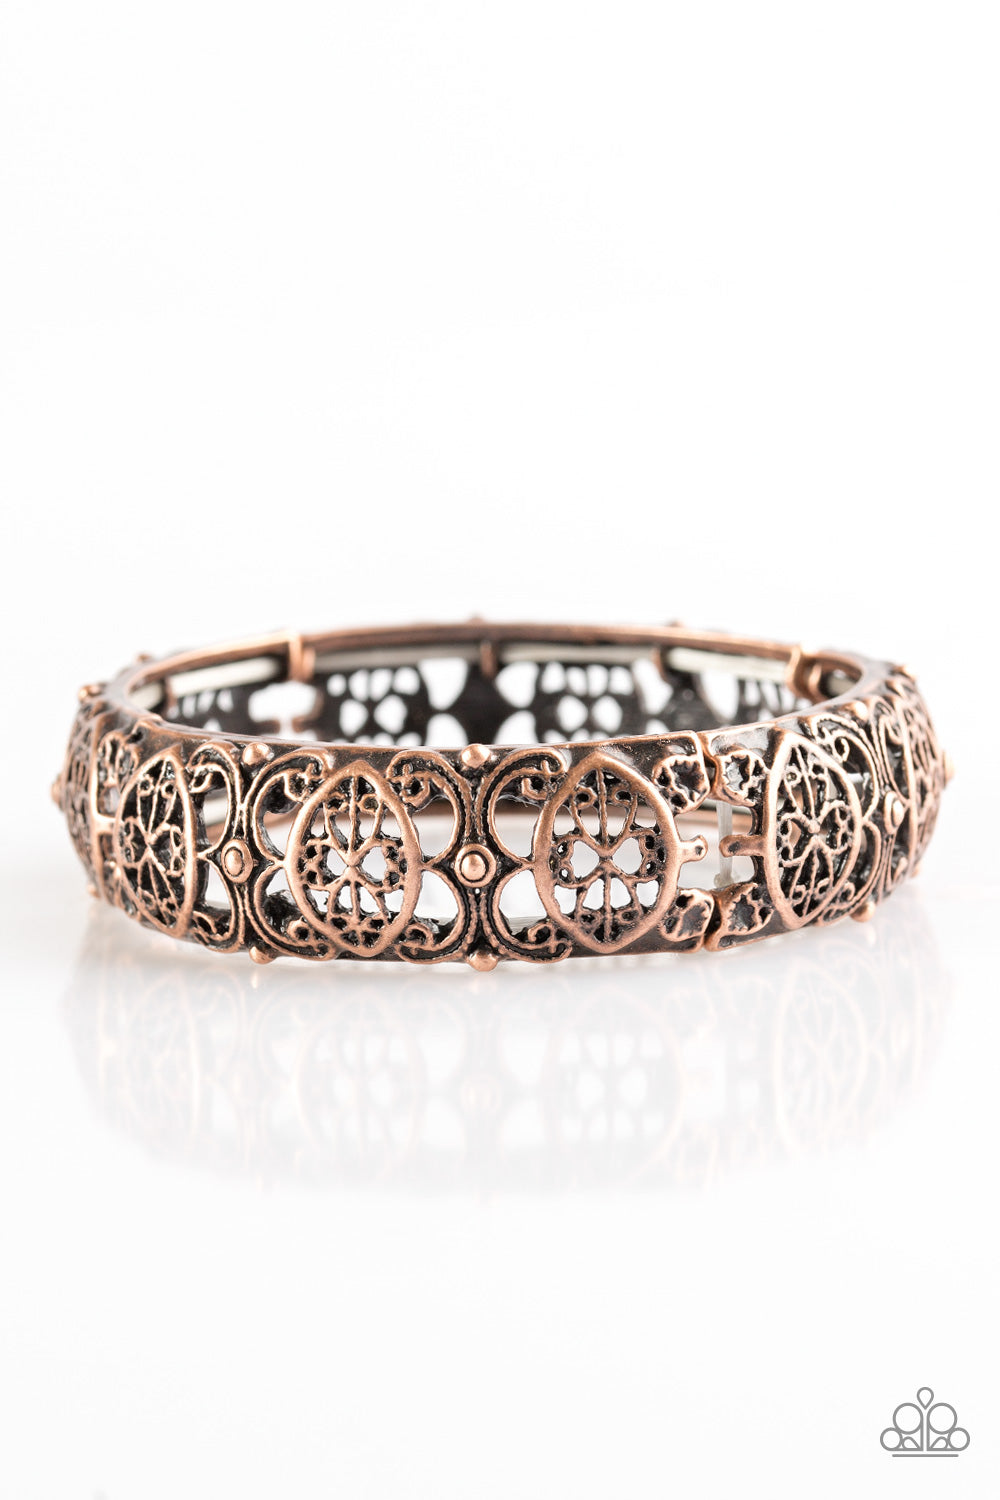 Paparazzi Naturally Nepal - Copper - Antiqued Shimmer - Ornate Stretchy Bracelet - $5 Jewelry With Ashley Swint